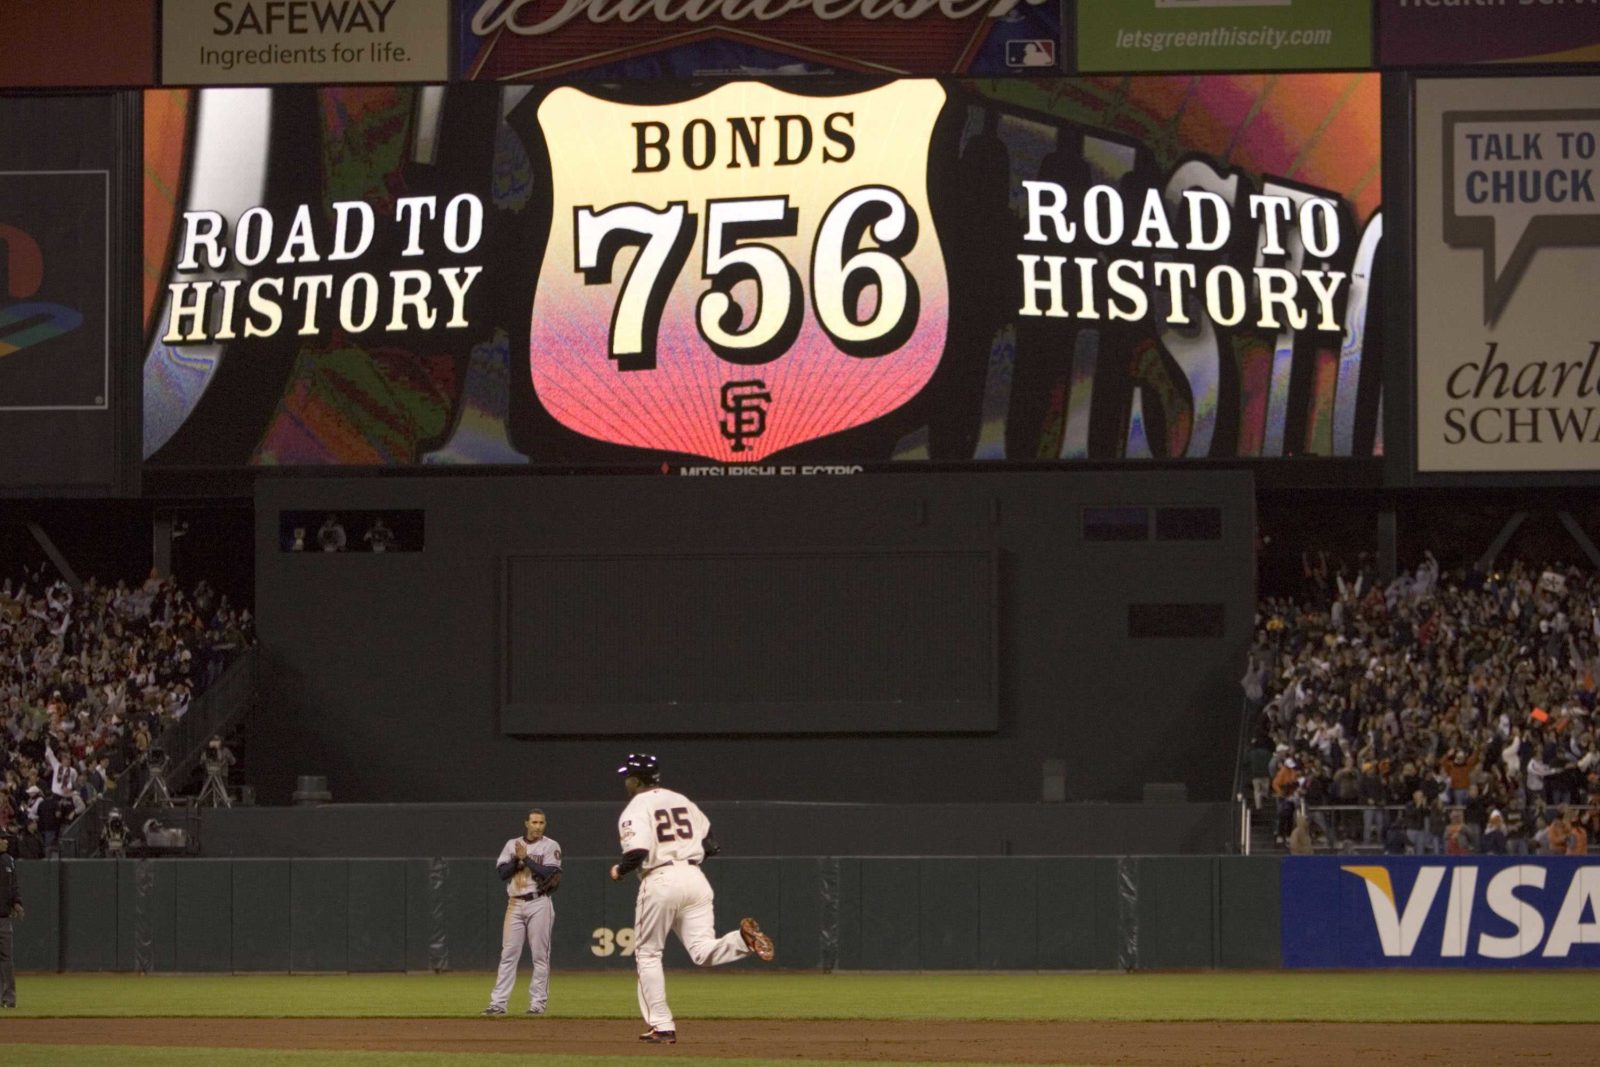 Barry Bonds breaks all-time home run record